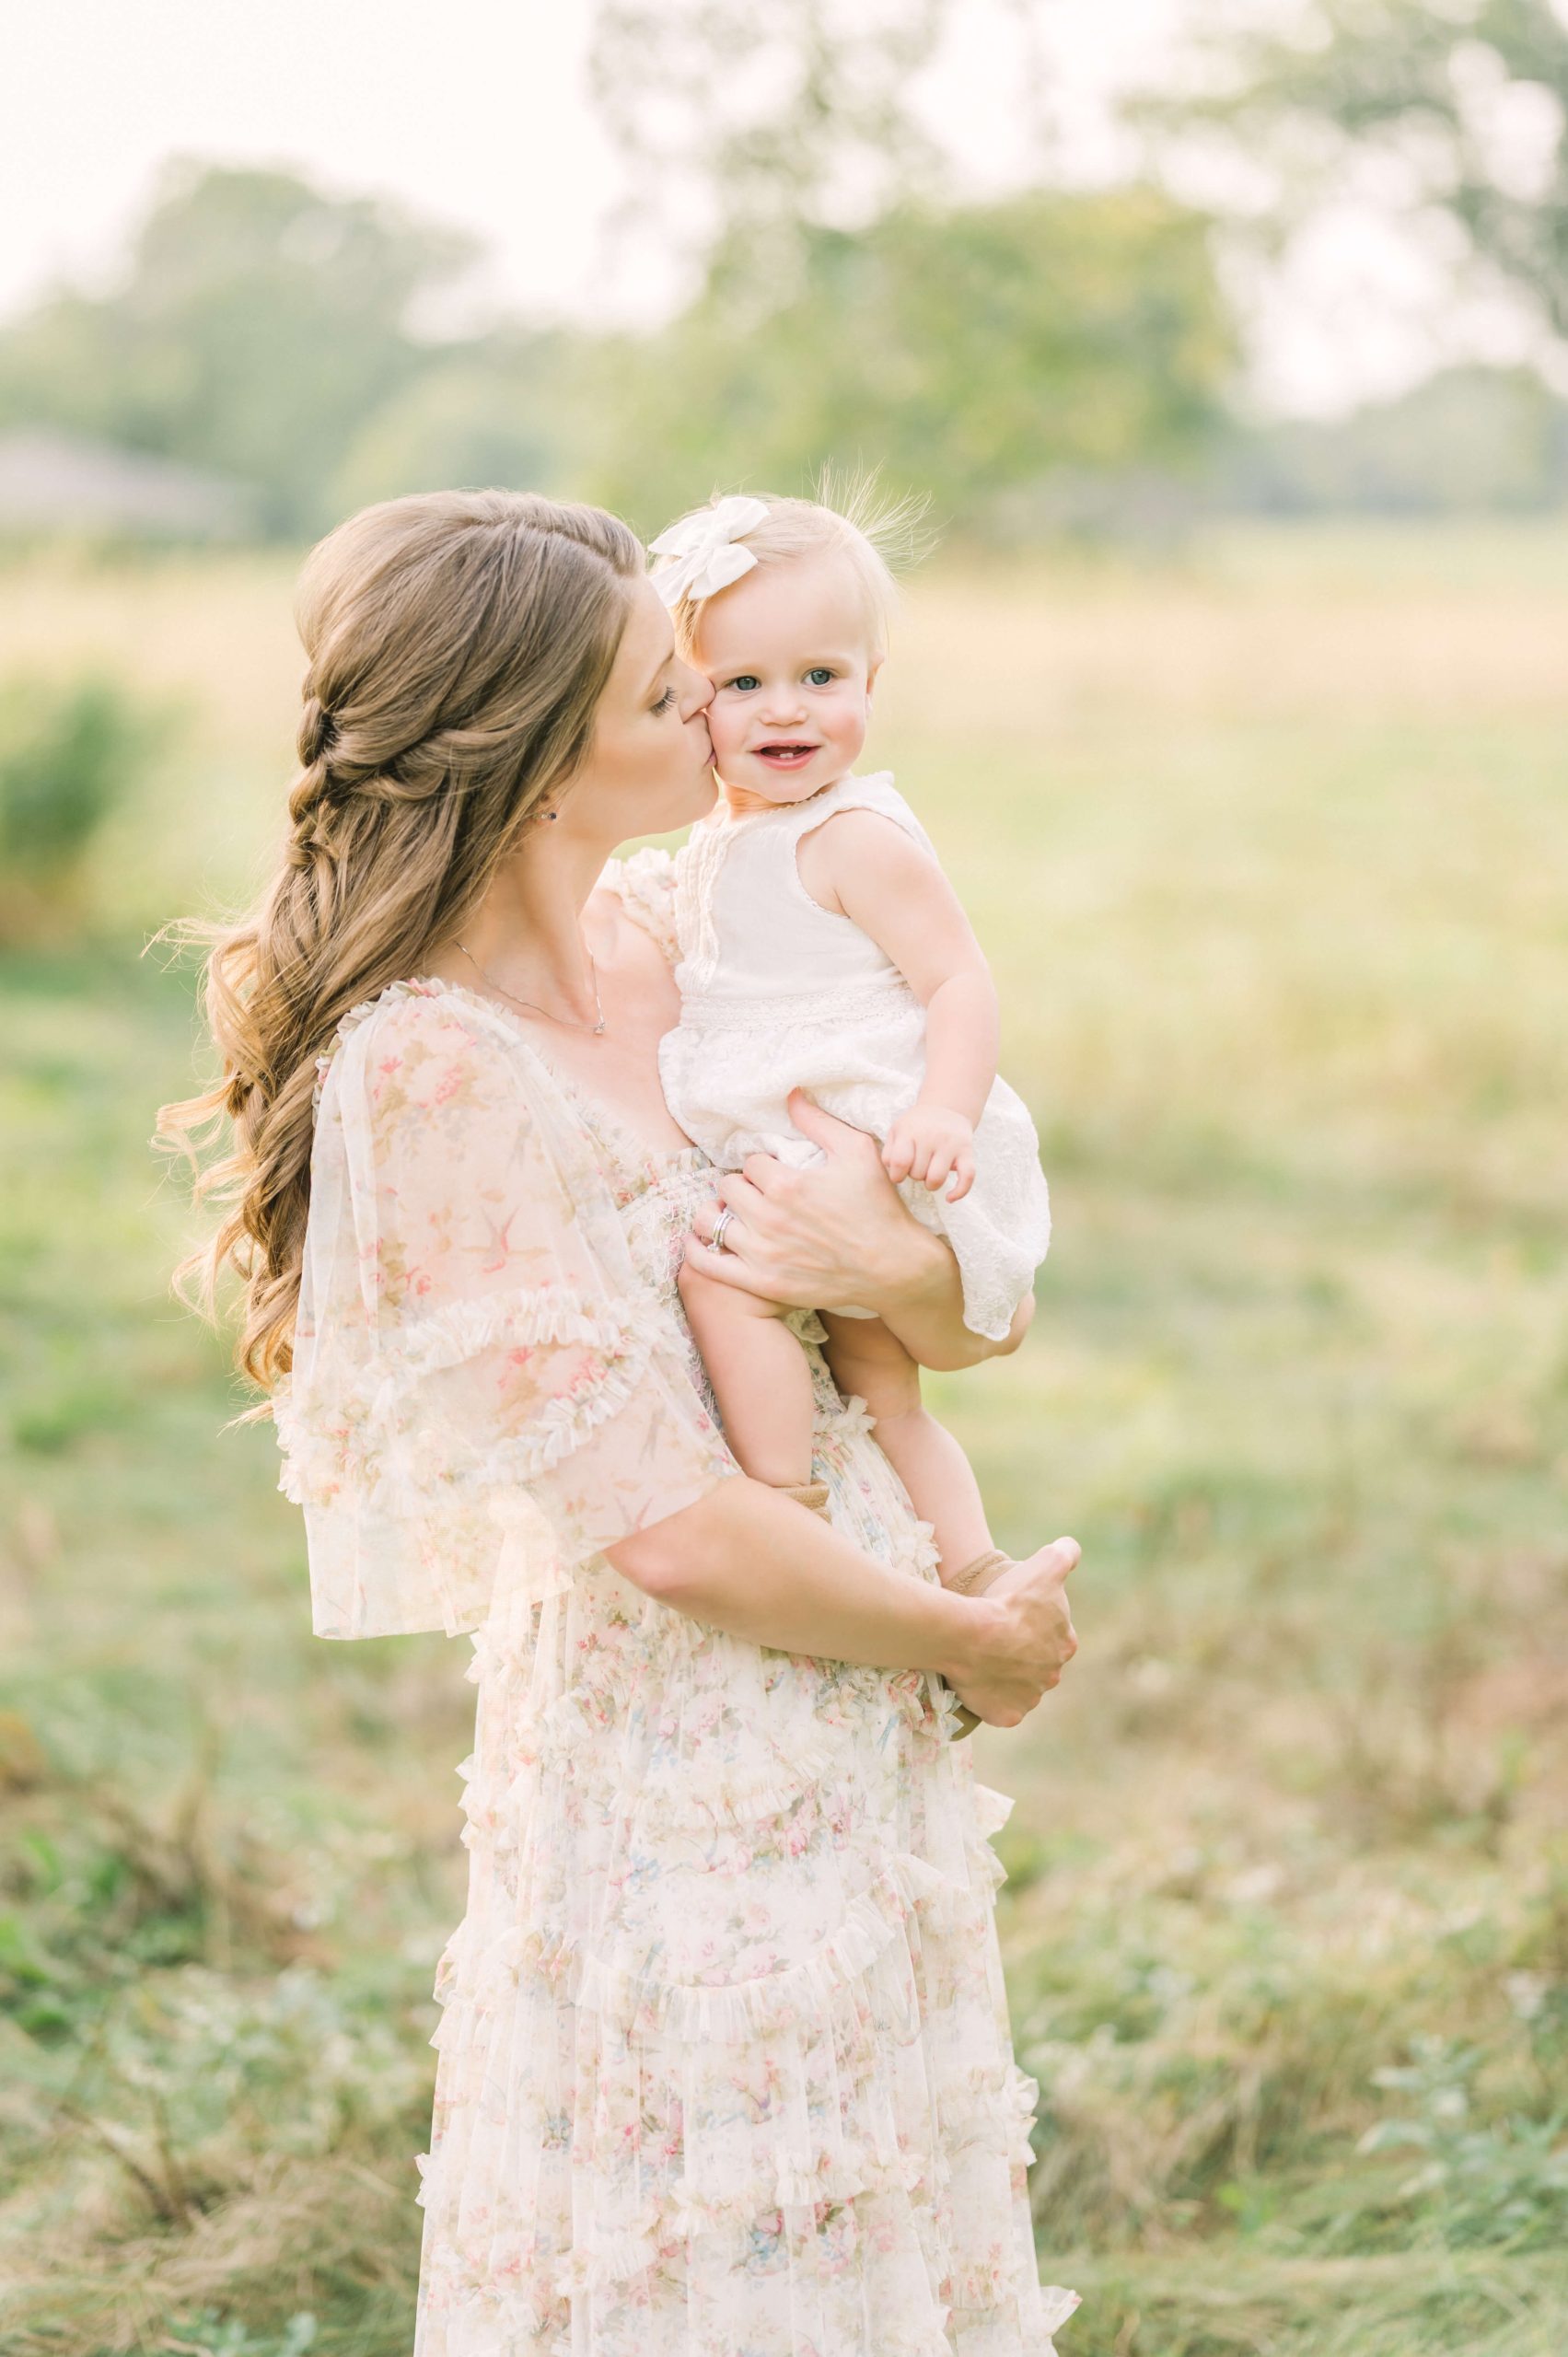 beautiful mother in outdoor field wearing needle and thread dress with daughter who is one year old